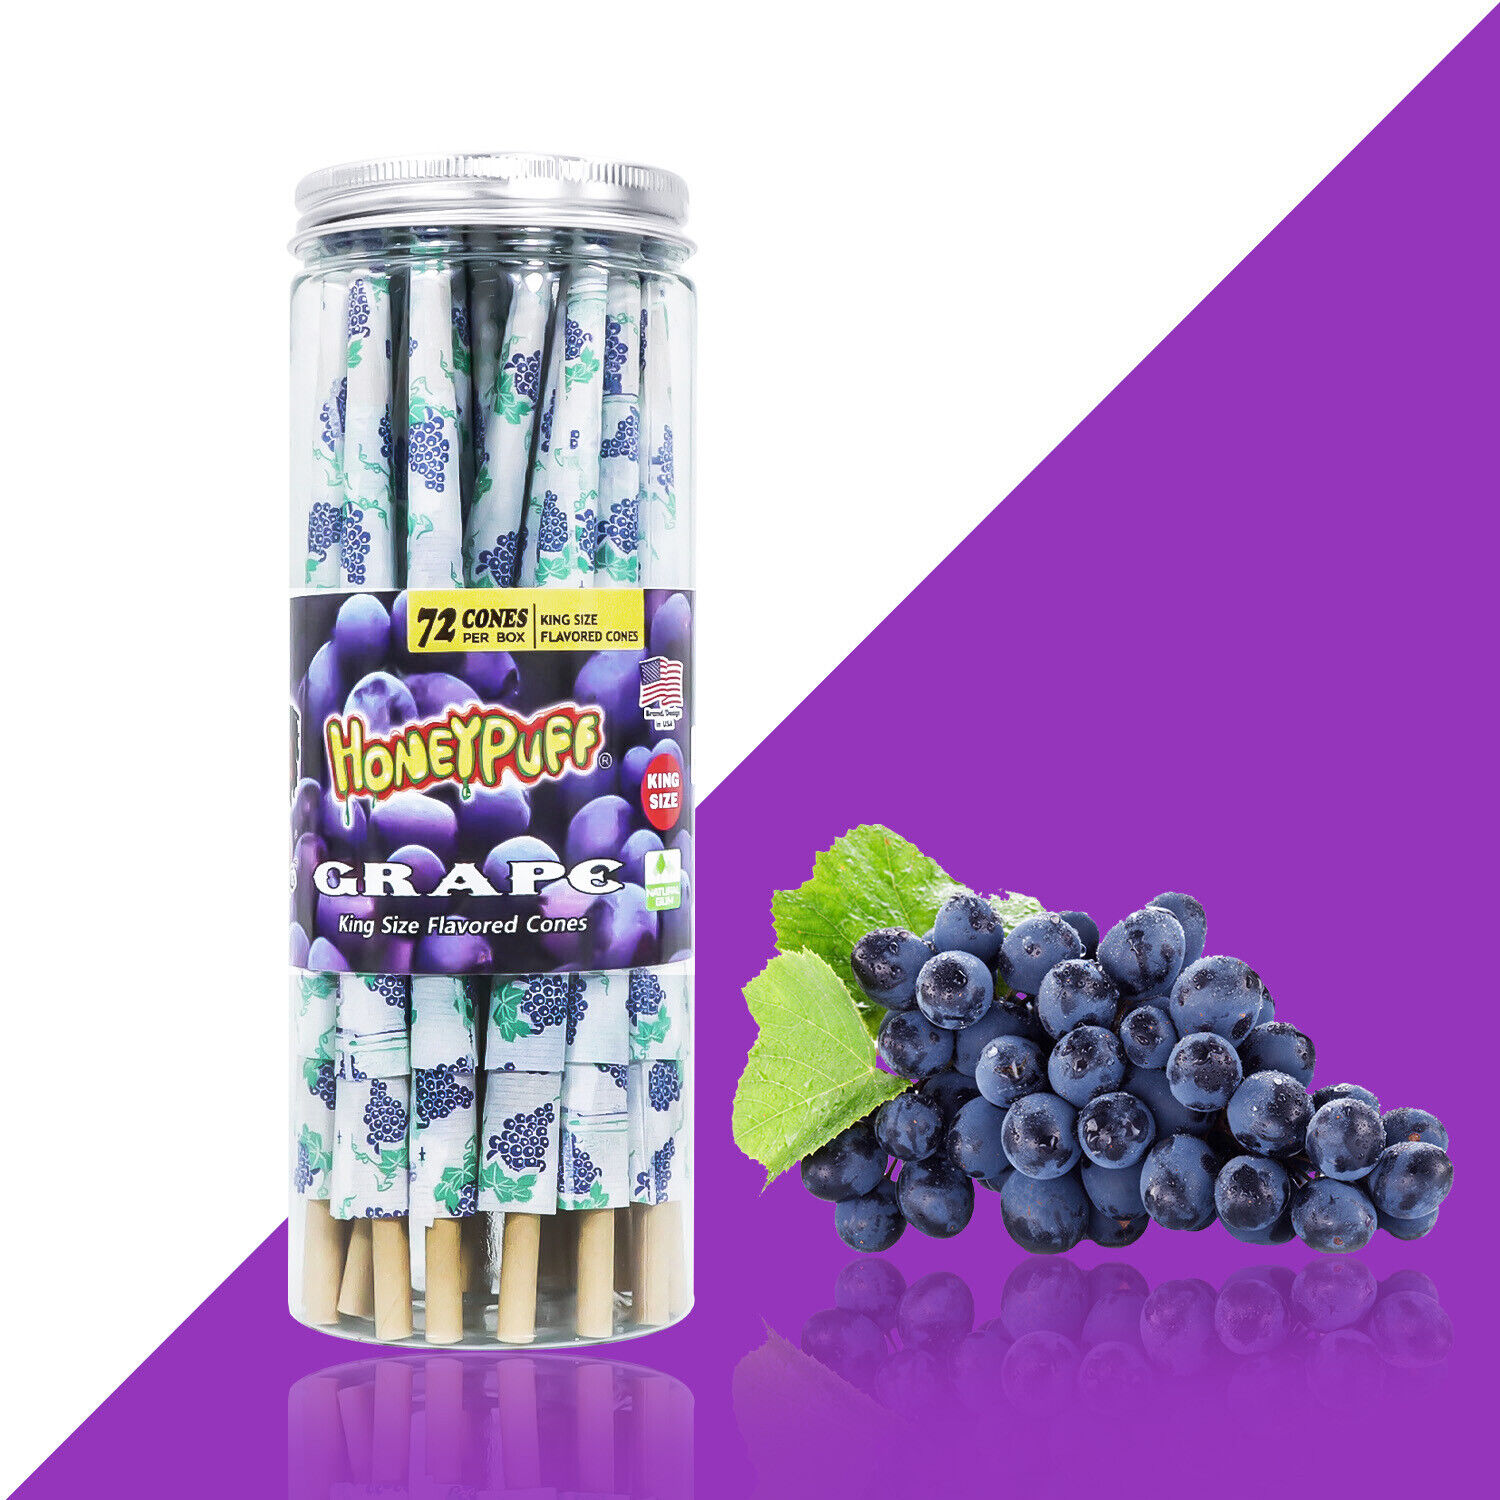 HONEYPUFF Classic King Size Grape Flavored Pre Rolled Cones 72 Pack